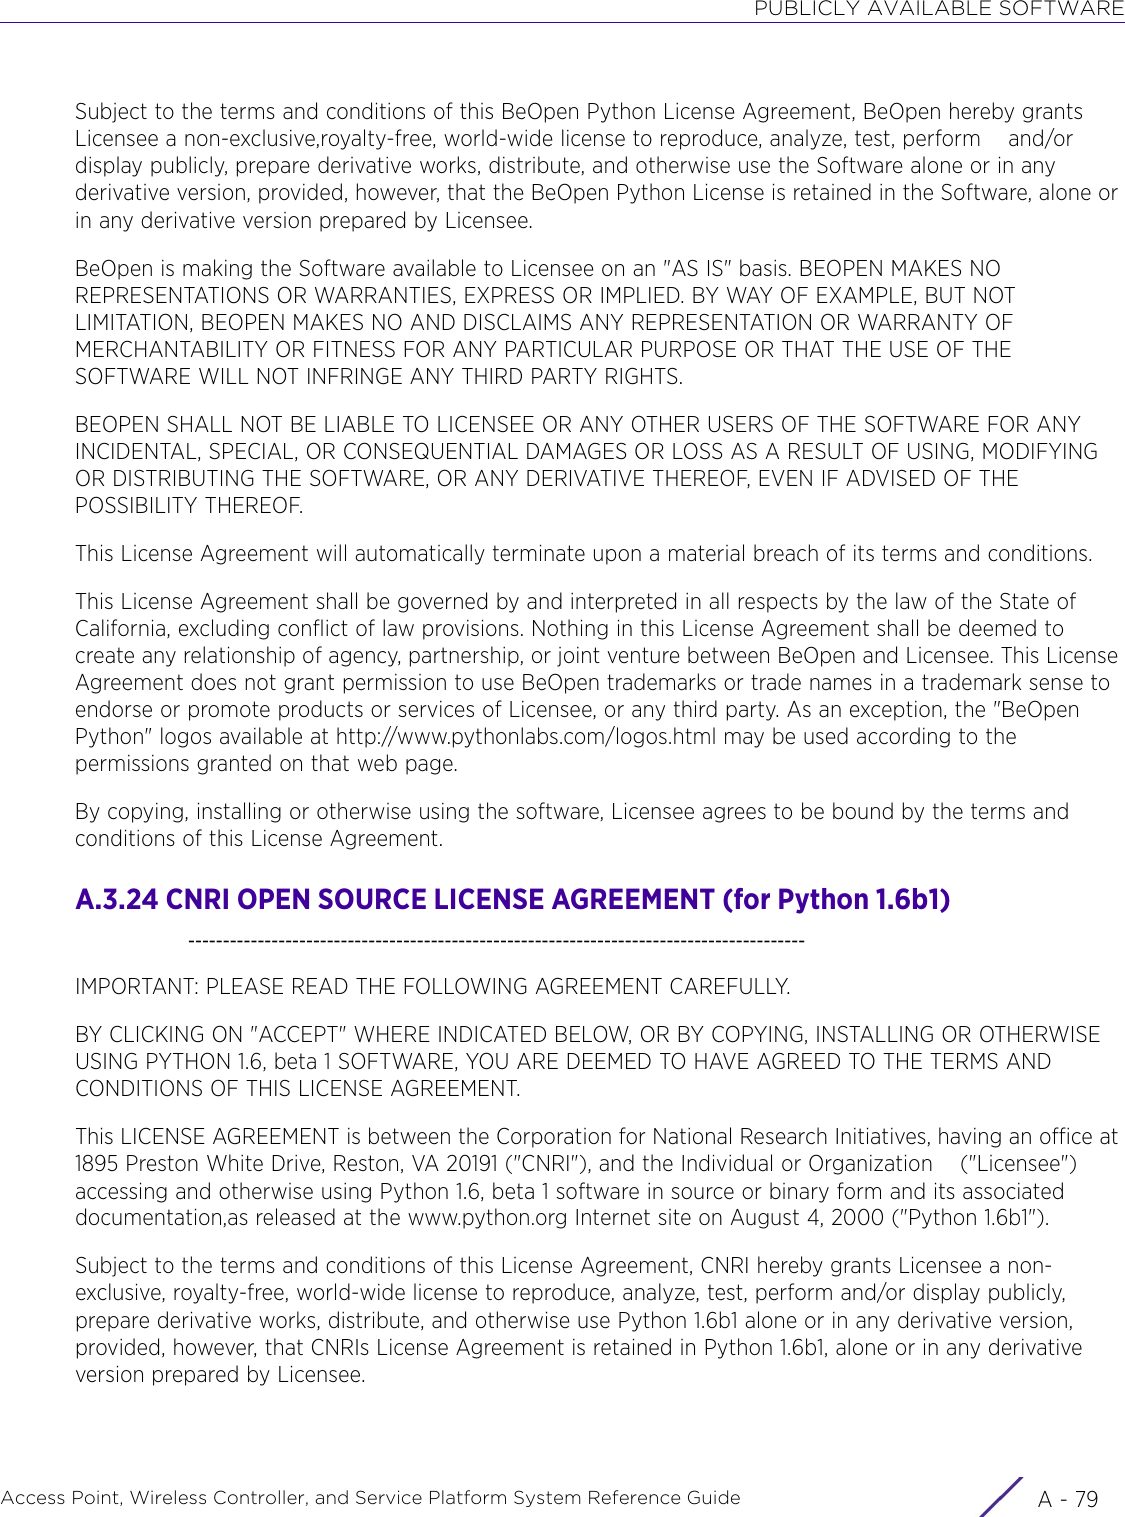 PUBLICLY AVAILABLE SOFTWAREAccess Point, Wireless Controller, and Service Platform System Reference Guide A - 79Subject to the terms and conditions of this BeOpen Python License Agreement, BeOpen hereby grants Licensee a non-exclusive,royalty-free, world-wide license to reproduce, analyze, test, perform    and/or display publicly, prepare derivative works, distribute, and otherwise use the Software alone or in any derivative version, provided, however, that the BeOpen Python License is retained in the Software, alone or in any derivative version prepared by Licensee.BeOpen is making the Software available to Licensee on an &quot;AS IS&quot; basis. BEOPEN MAKES NO REPRESENTATIONS OR WARRANTIES, EXPRESS OR IMPLIED. BY WAY OF EXAMPLE, BUT NOT LIMITATION, BEOPEN MAKES NO AND DISCLAIMS ANY REPRESENTATION OR WARRANTY OF MERCHANTABILITY OR FITNESS FOR ANY PARTICULAR PURPOSE OR THAT THE USE OF THE SOFTWARE WILL NOT INFRINGE ANY THIRD PARTY RIGHTS.BEOPEN SHALL NOT BE LIABLE TO LICENSEE OR ANY OTHER USERS OF THE SOFTWARE FOR ANY INCIDENTAL, SPECIAL, OR CONSEQUENTIAL DAMAGES OR LOSS AS A RESULT OF USING, MODIFYING OR DISTRIBUTING THE SOFTWARE, OR ANY DERIVATIVE THEREOF, EVEN IF ADVISED OF THE POSSIBILITY THEREOF.This License Agreement will automatically terminate upon a material breach of its terms and conditions.This License Agreement shall be governed by and interpreted in all respects by the law of the State of California, excluding conflict of law provisions. Nothing in this License Agreement shall be deemed to     create any relationship of agency, partnership, or joint venture between BeOpen and Licensee. This License Agreement does not grant permission to use BeOpen trademarks or trade names in a trademark sense to endorse or promote products or services of Licensee, or any third party. As an exception, the &quot;BeOpen Python&quot; logos available at http://www.pythonlabs.com/logos.html may be used according to the permissions granted on that web page.By copying, installing or otherwise using the software, Licensee agrees to be bound by the terms and conditions of this License Agreement.A.3.24 CNRI OPEN SOURCE LICENSE AGREEMENT (for Python 1.6b1)    -----------------------------------------------------------------------------------------IMPORTANT: PLEASE READ THE FOLLOWING AGREEMENT CAREFULLY.BY CLICKING ON &quot;ACCEPT&quot; WHERE INDICATED BELOW, OR BY COPYING, INSTALLING OR OTHERWISE USING PYTHON 1.6, beta 1 SOFTWARE, YOU ARE DEEMED TO HAVE AGREED TO THE TERMS AND CONDITIONS OF THIS LICENSE AGREEMENT.This LICENSE AGREEMENT is between the Corporation for National Research Initiatives, having an office at 1895 Preston White Drive, Reston, VA 20191 (&quot;CNRI&quot;), and the Individual or Organization    (&quot;Licensee&quot;) accessing and otherwise using Python 1.6, beta 1 software in source or binary form and its associated documentation,as released at the www.python.org Internet site on August 4, 2000 (&quot;Python 1.6b1&quot;).Subject to the terms and conditions of this License Agreement, CNRI hereby grants Licensee a non-exclusive, royalty-free, world-wide license to reproduce, analyze, test, perform and/or display publicly, prepare derivative works, distribute, and otherwise use Python 1.6b1 alone or in any derivative version, provided, however, that CNRIs License Agreement is retained in Python 1.6b1, alone or in any derivative version prepared by Licensee.